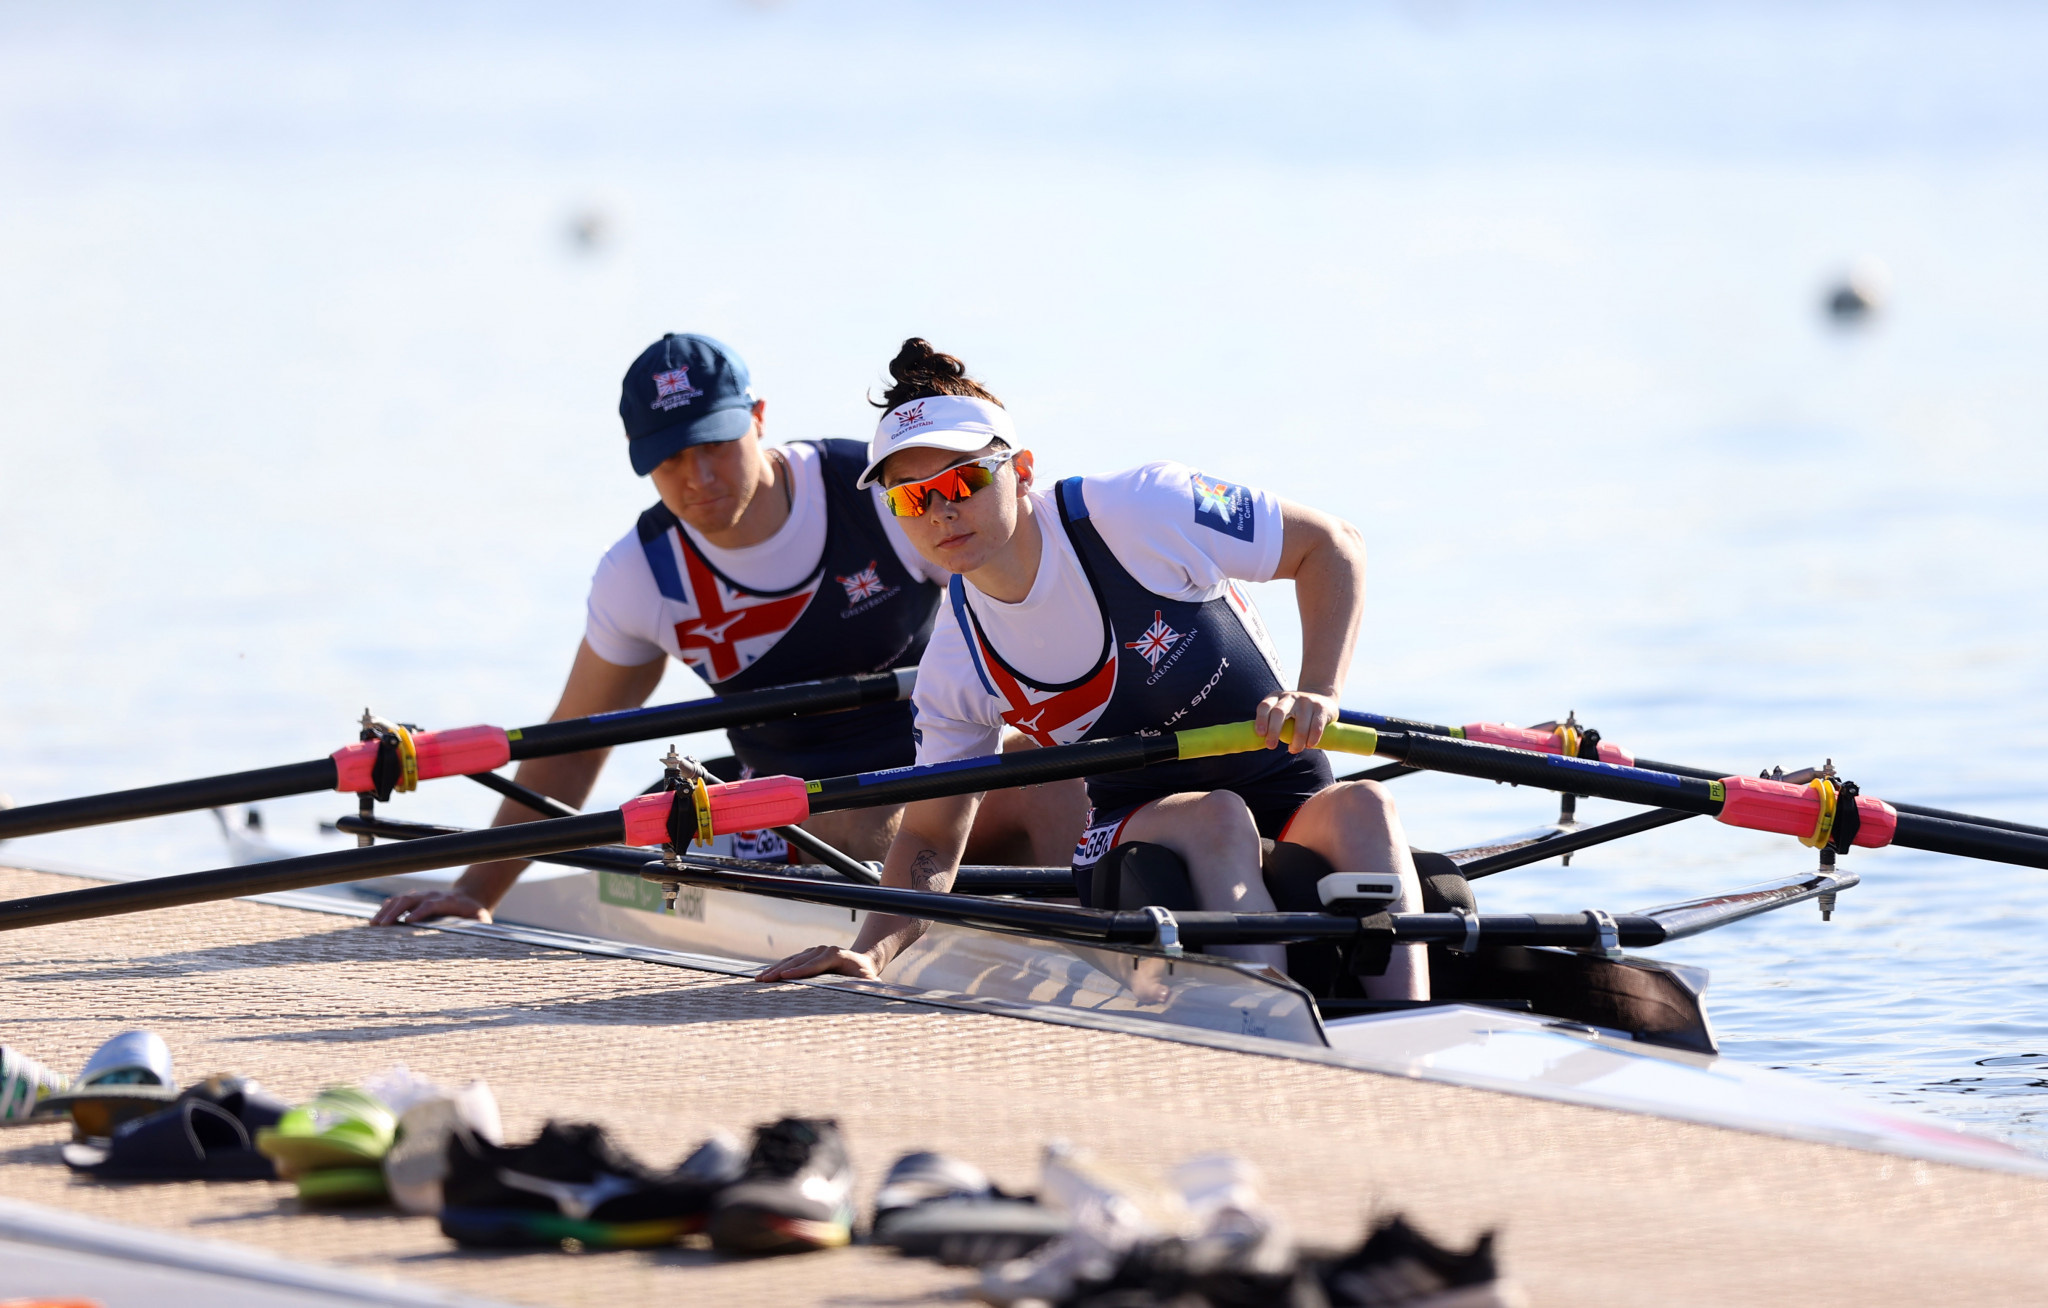 Rowing: The Tokyo 2020 Paralympics team of Great Britain, A double sculling event. 2050x1310 HD Background.